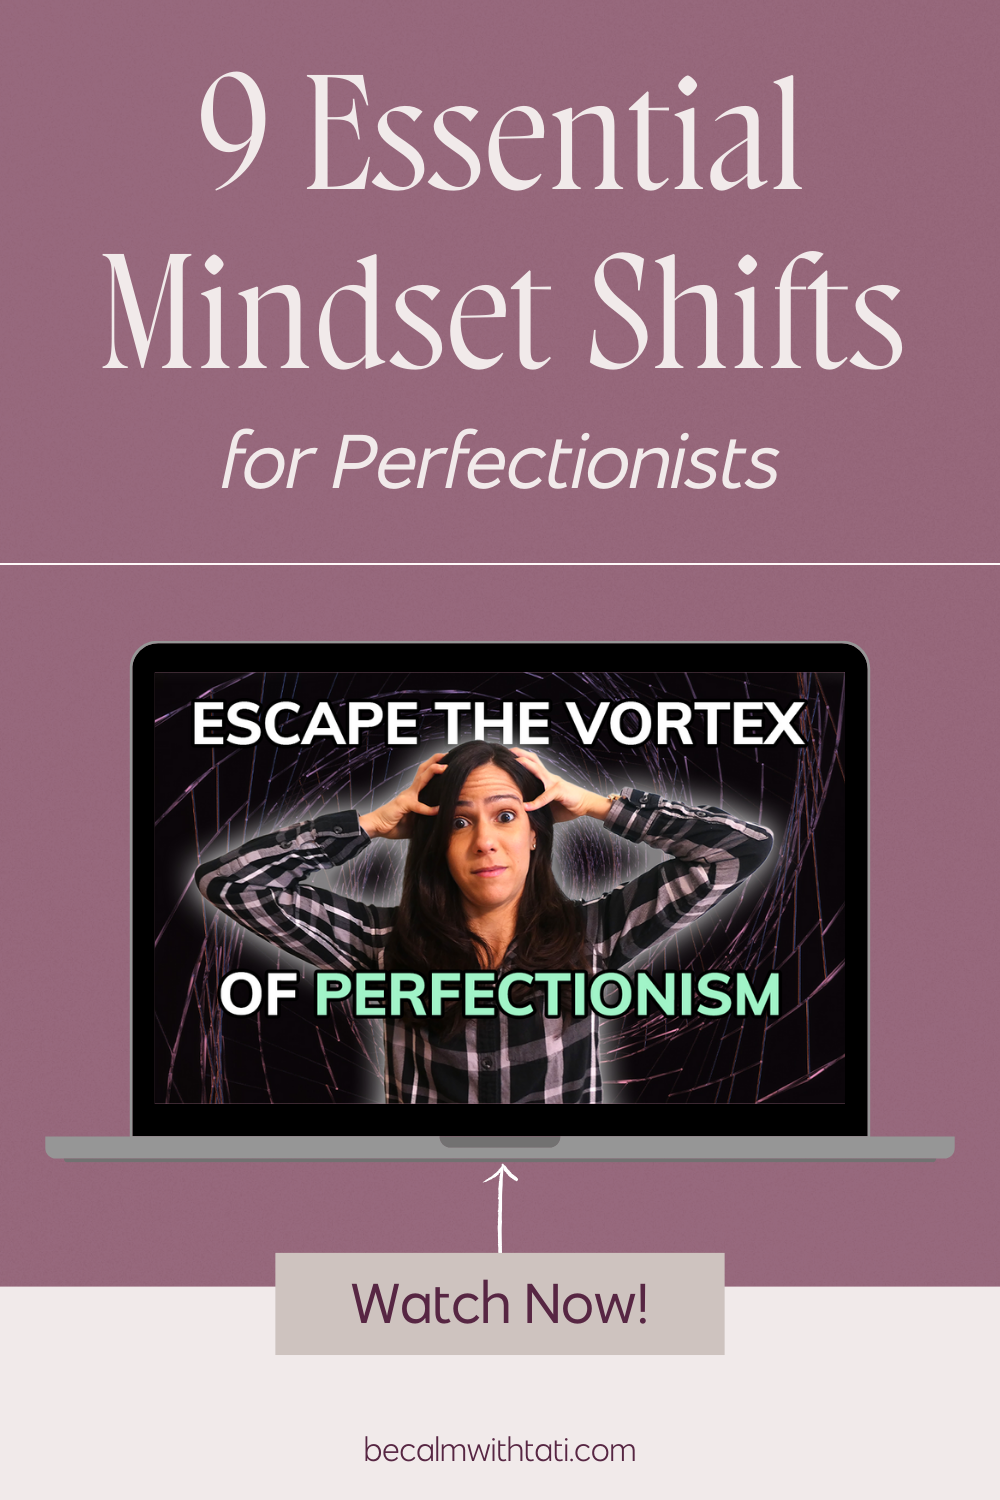 9 Essential Mindset Shifts for Perfectionists